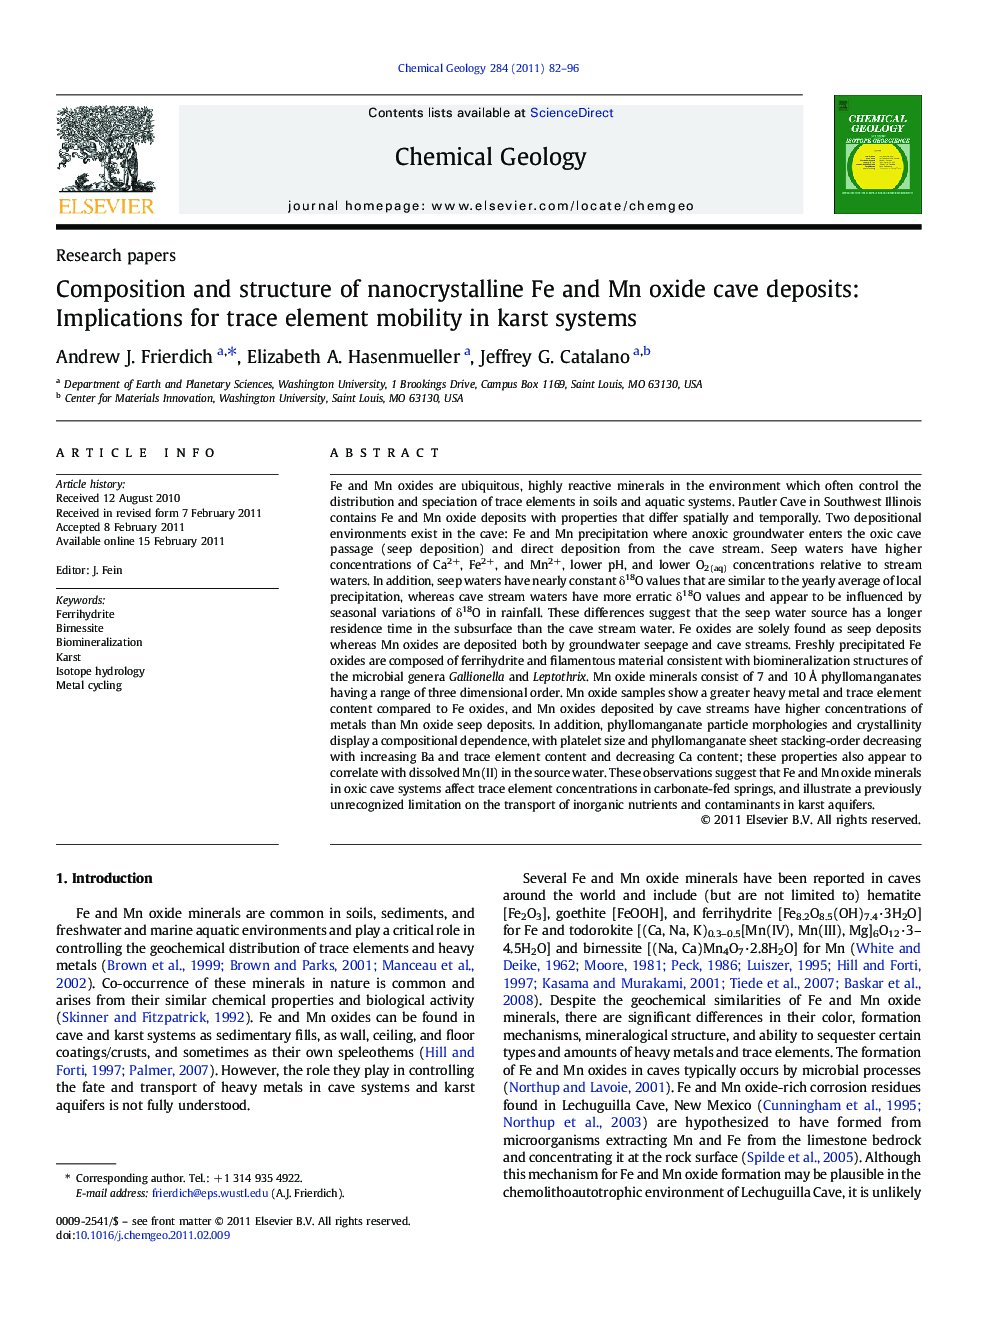 Composition and structure of nanocrystalline Fe and Mn oxide cave deposits: Implications for trace element mobility in karst systems